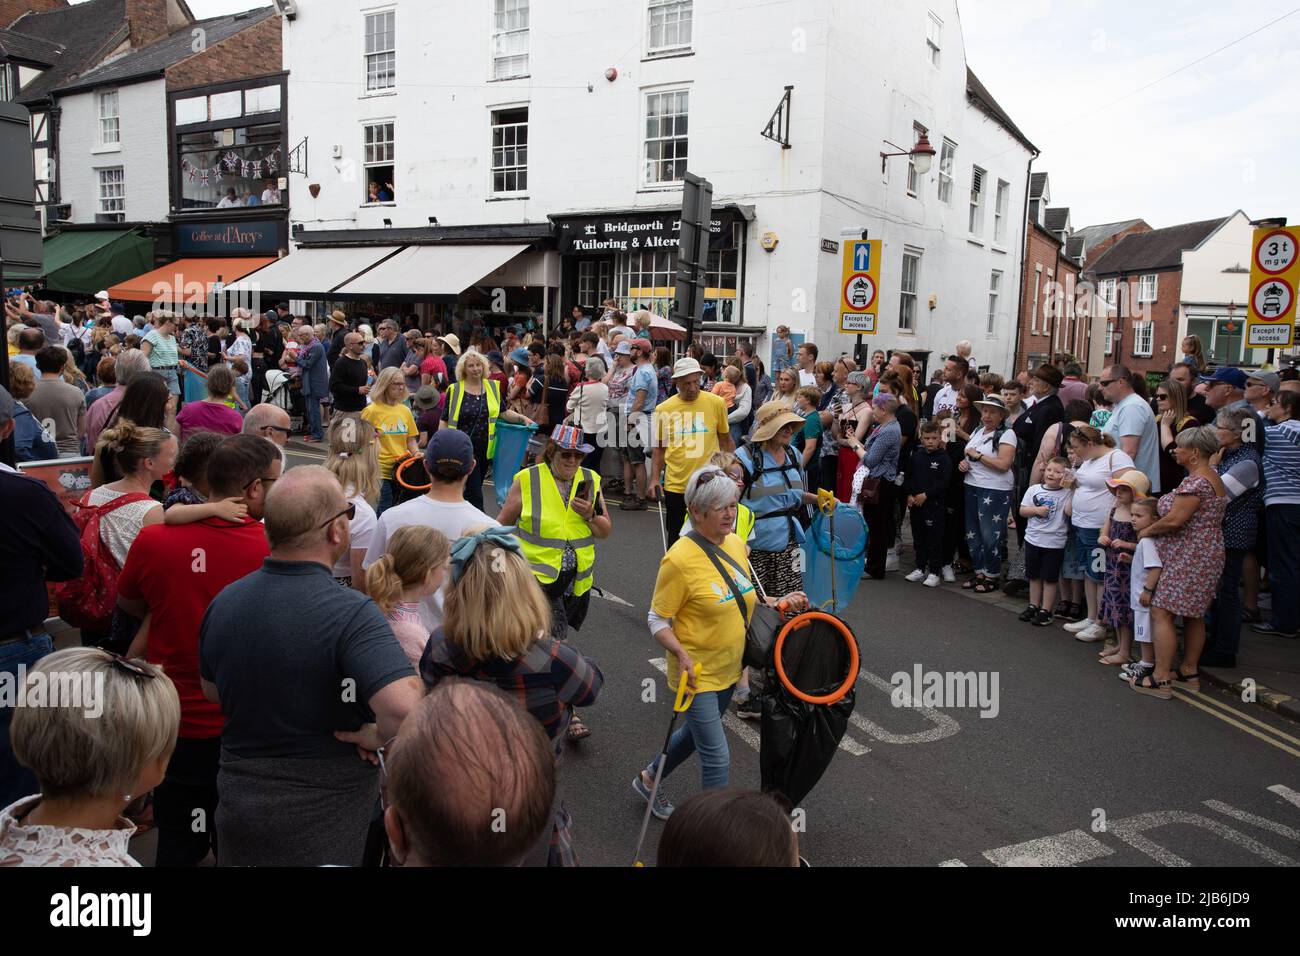 Bridgnorth, UK. 3rd June 2022: People enjoying themselves at Bridgnorth Carnival in the Shropshire Town of Bridgnorth, UK.  This is the first time for four years that the Carnival has taken place due to weather in 2019 and Covid in 2020.  The event this year coincided with the Queen's Platinum Jubliee Credit Richard O'Donoghue/Alamy Live News Stock Photo